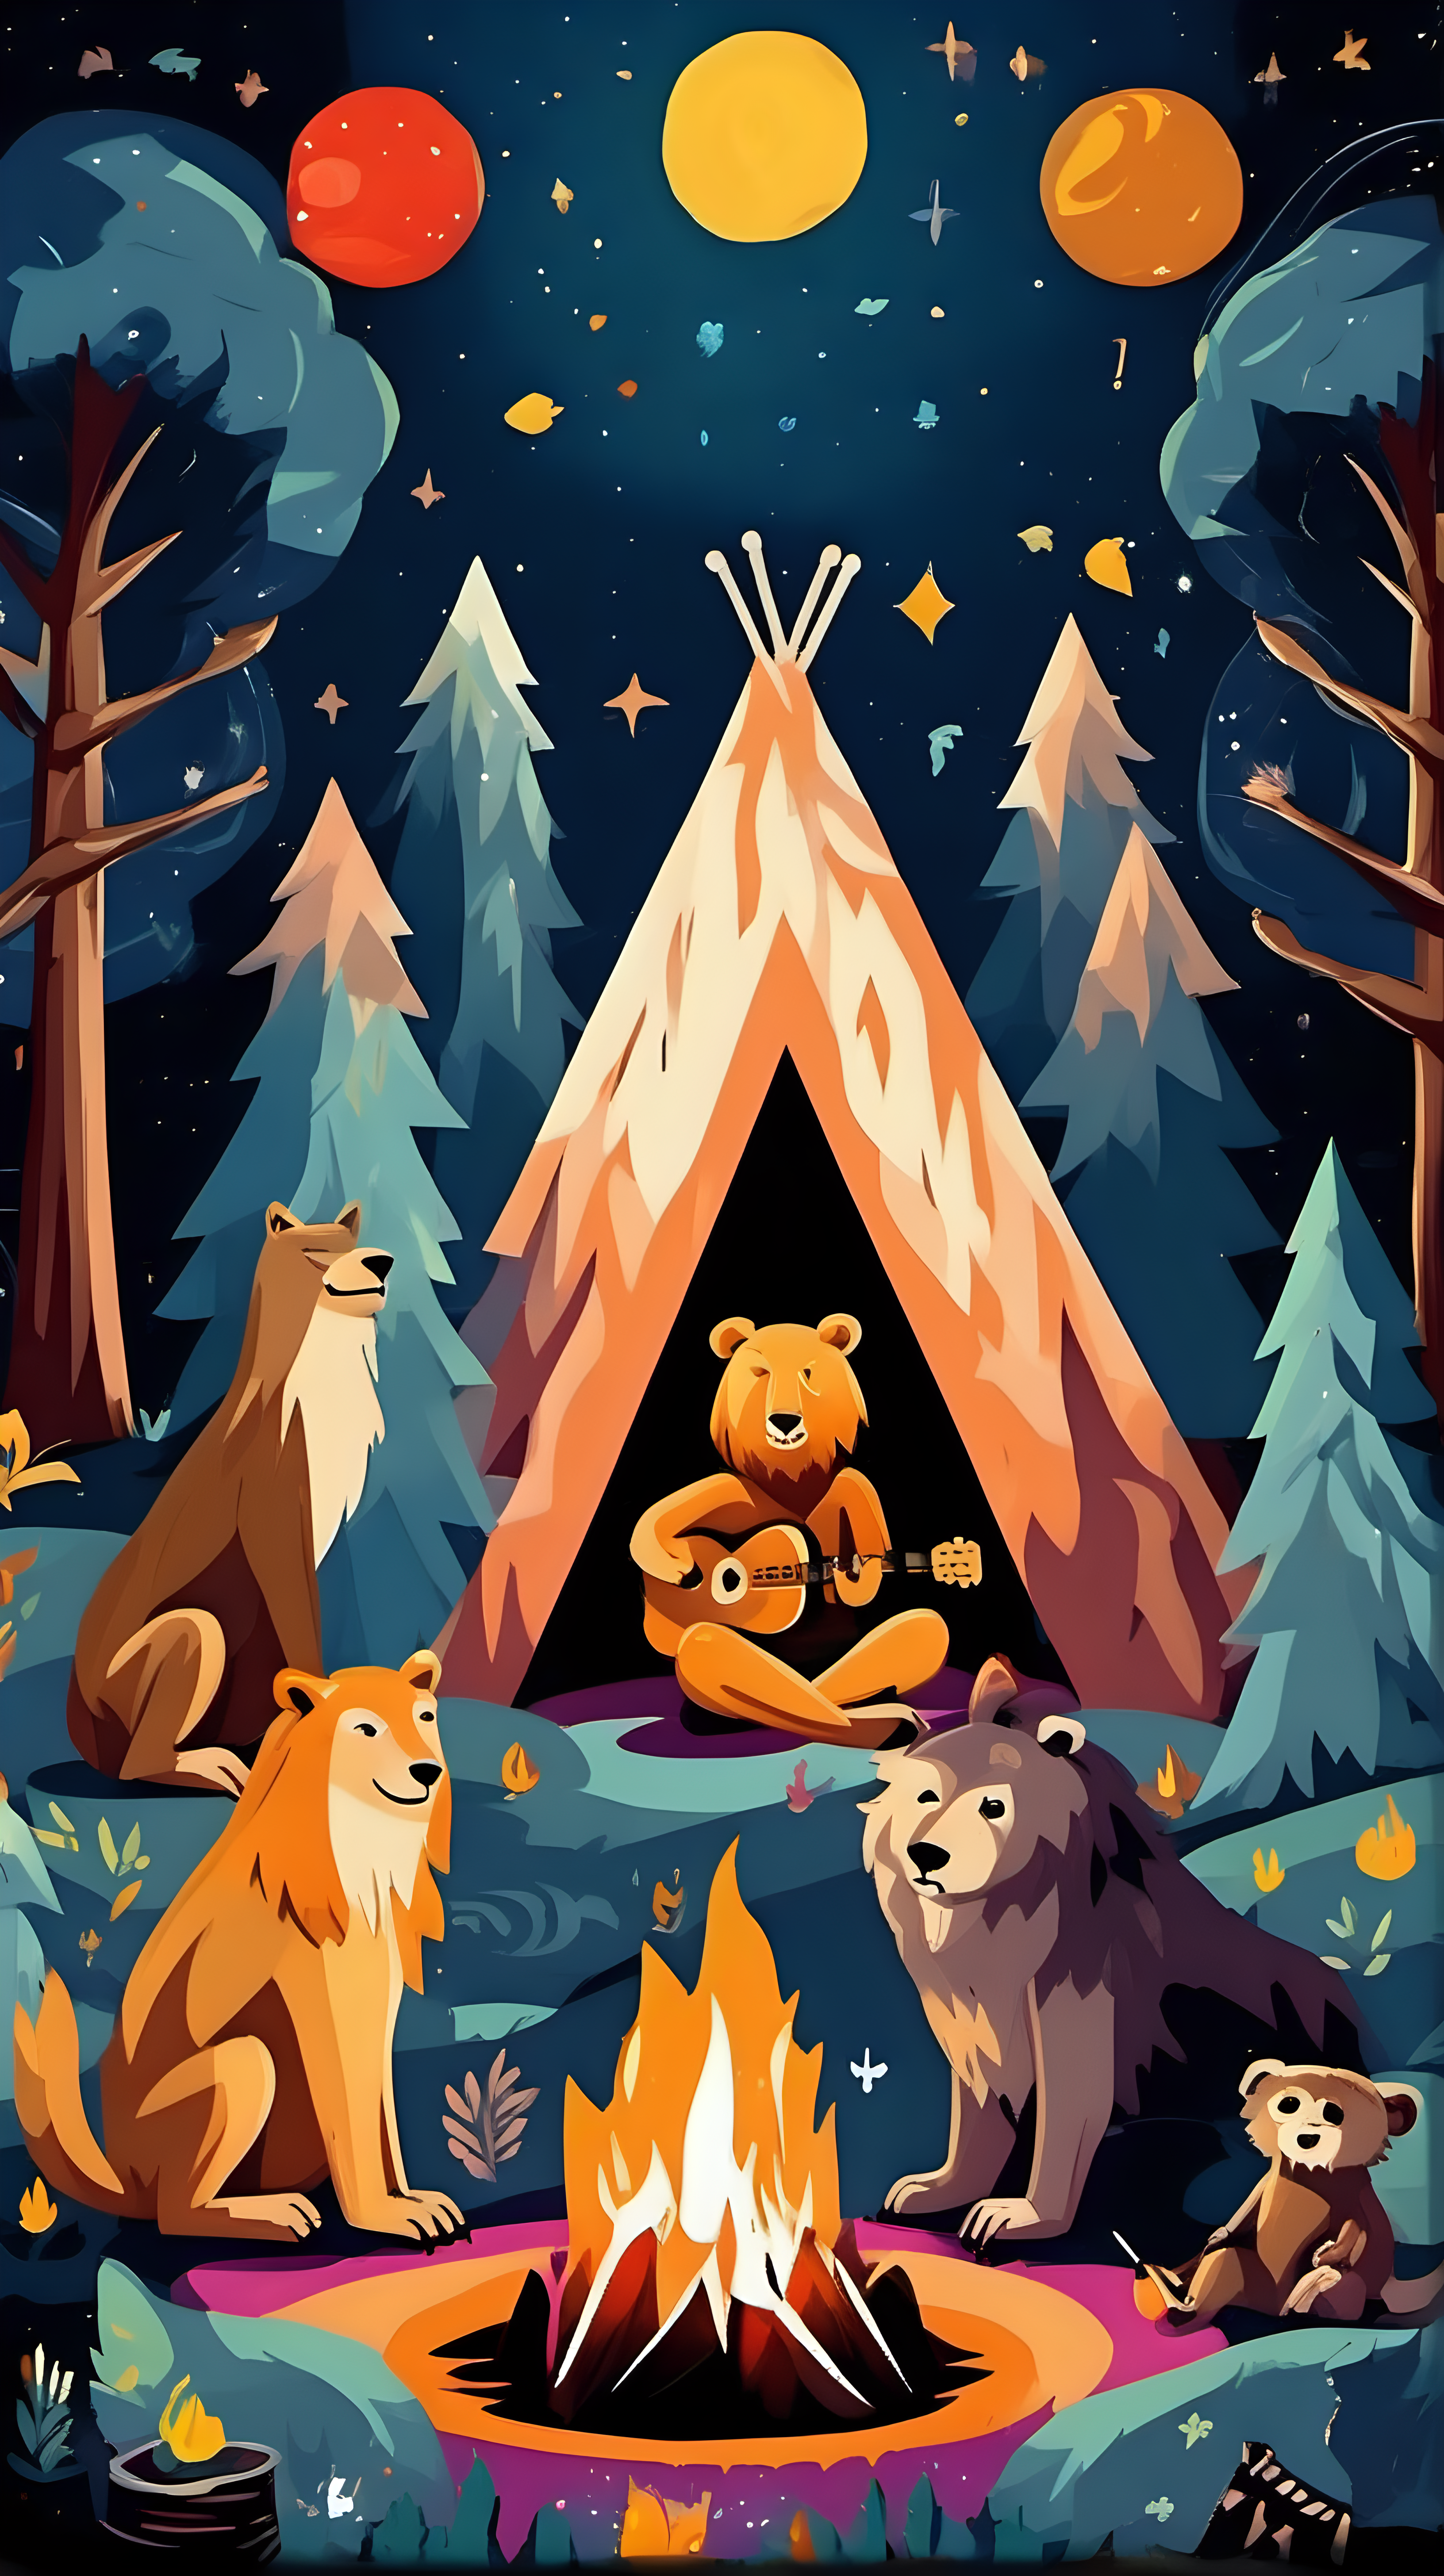 cosmic campfire with animals playing music lion bear wolf owl